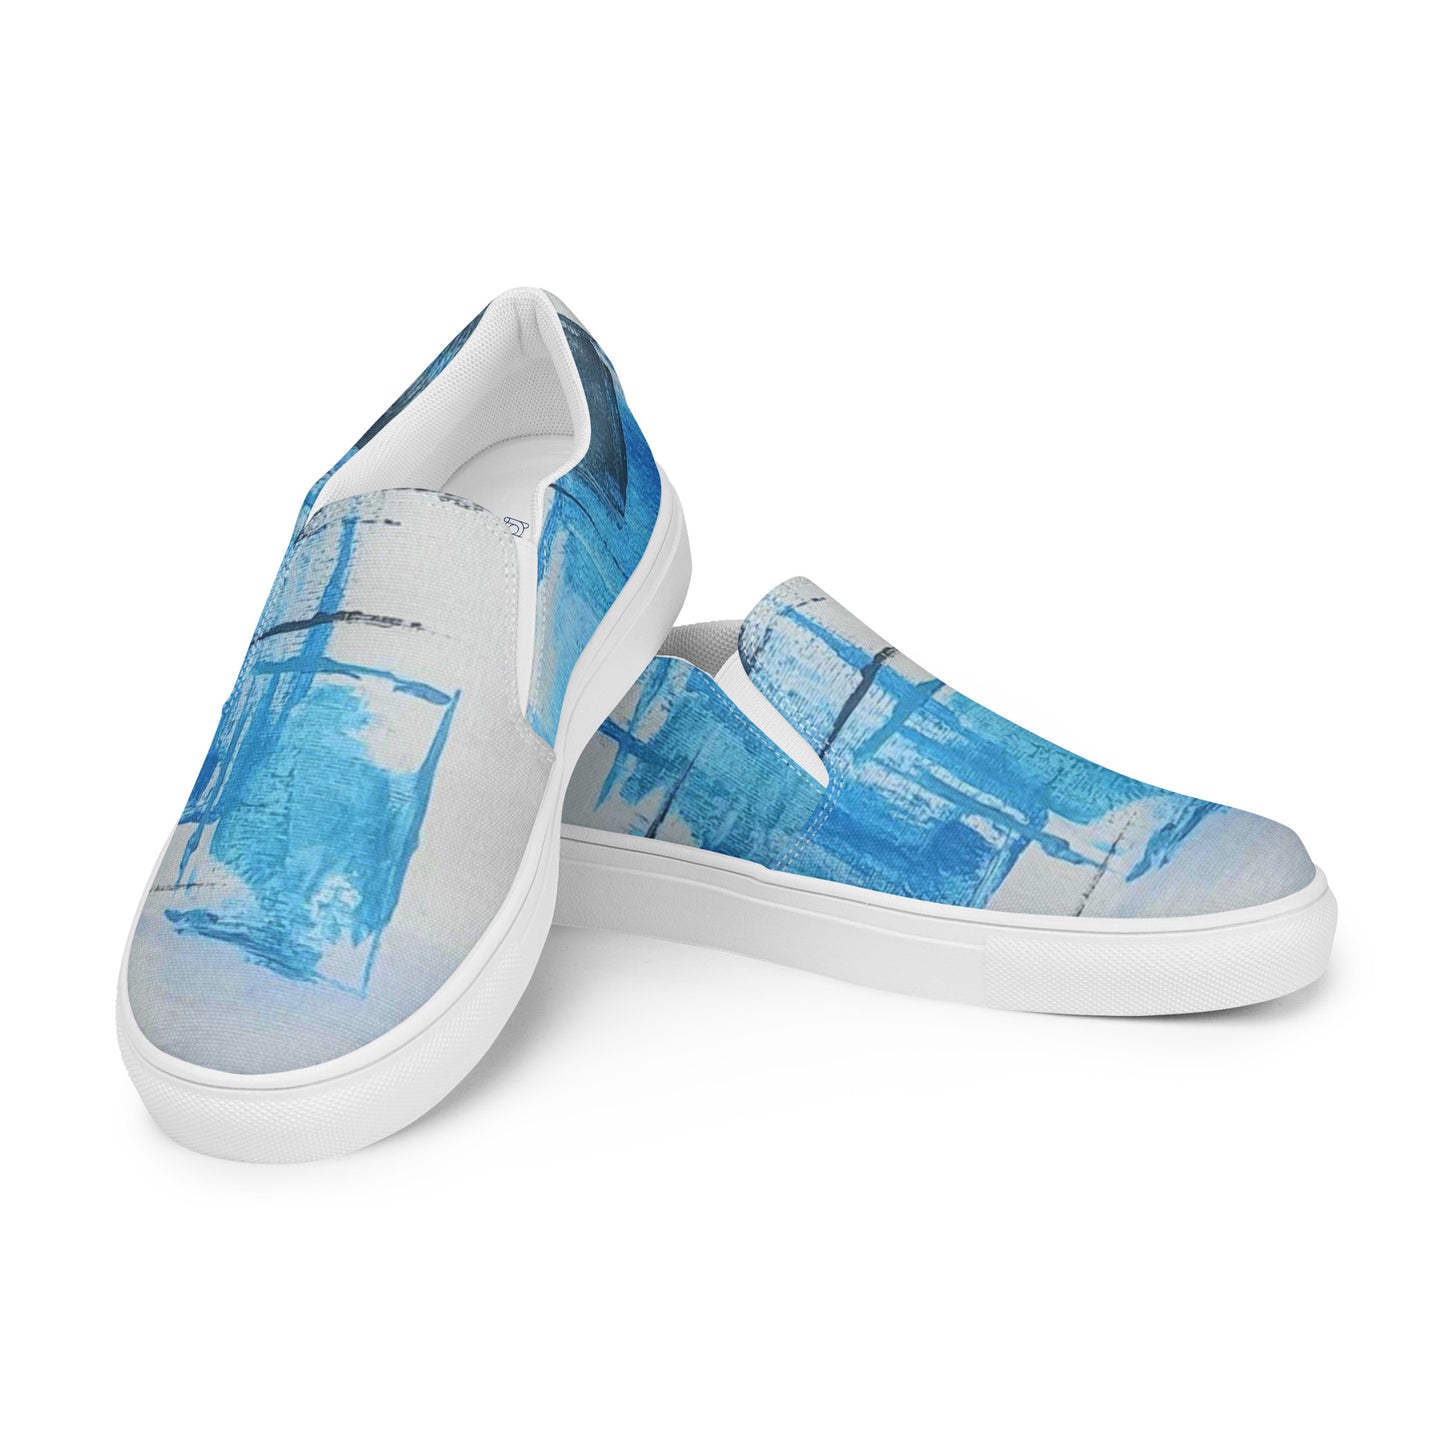 Women’s slip-on canvas shoes - Mess